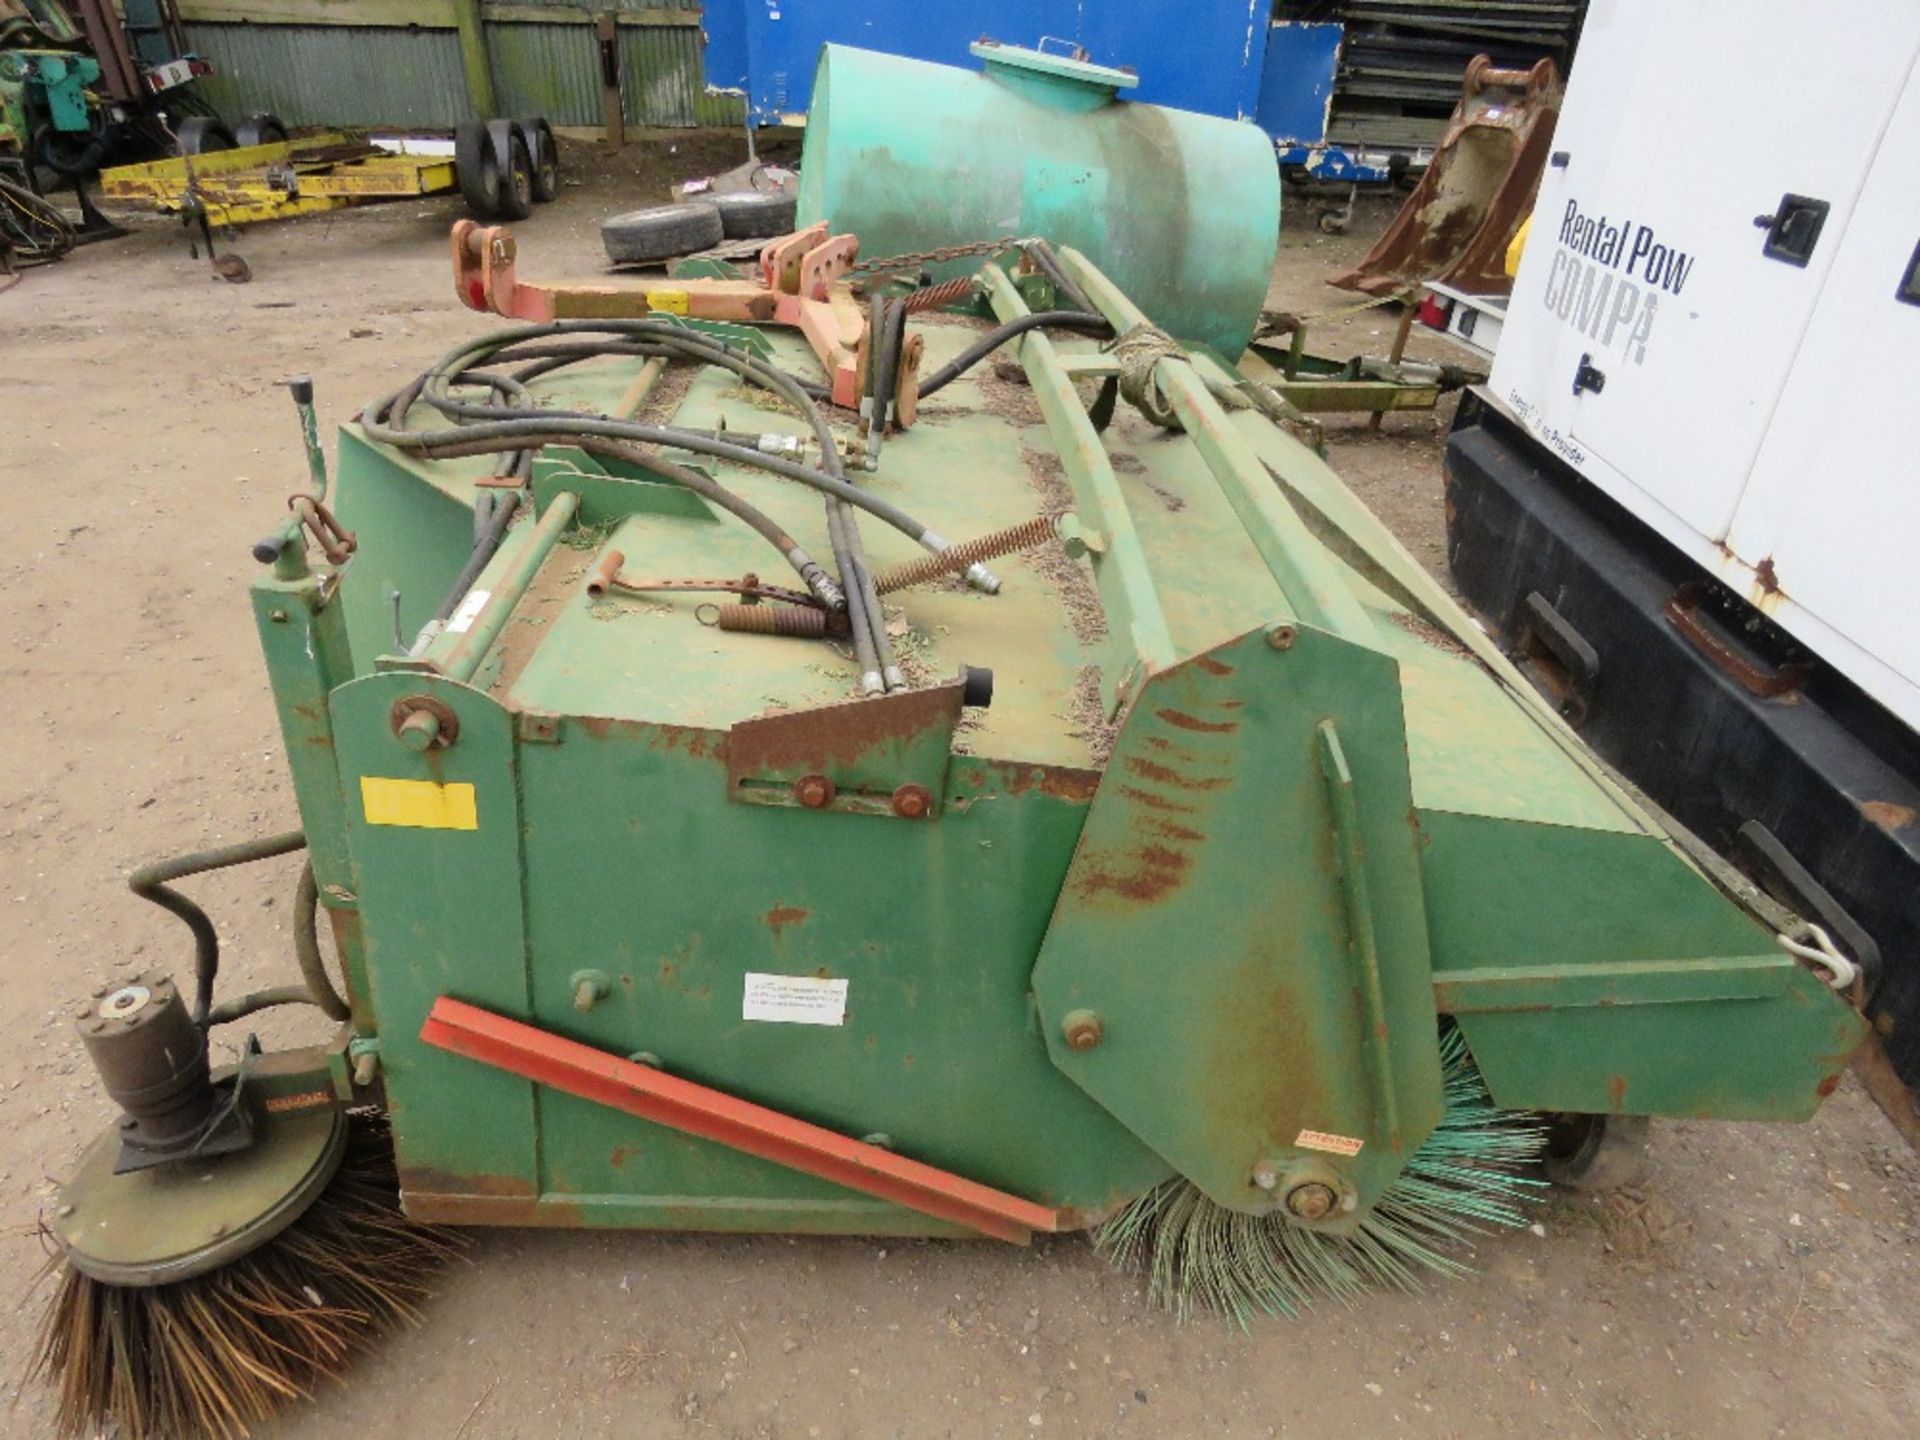 SUTON / GURNEY REEVE 2.2M WIDE HYDRAULIC POWERED YARD BRUSH WITH COLLECTOR AND GUTTER BRUSH. YEAR 20 - Image 2 of 5